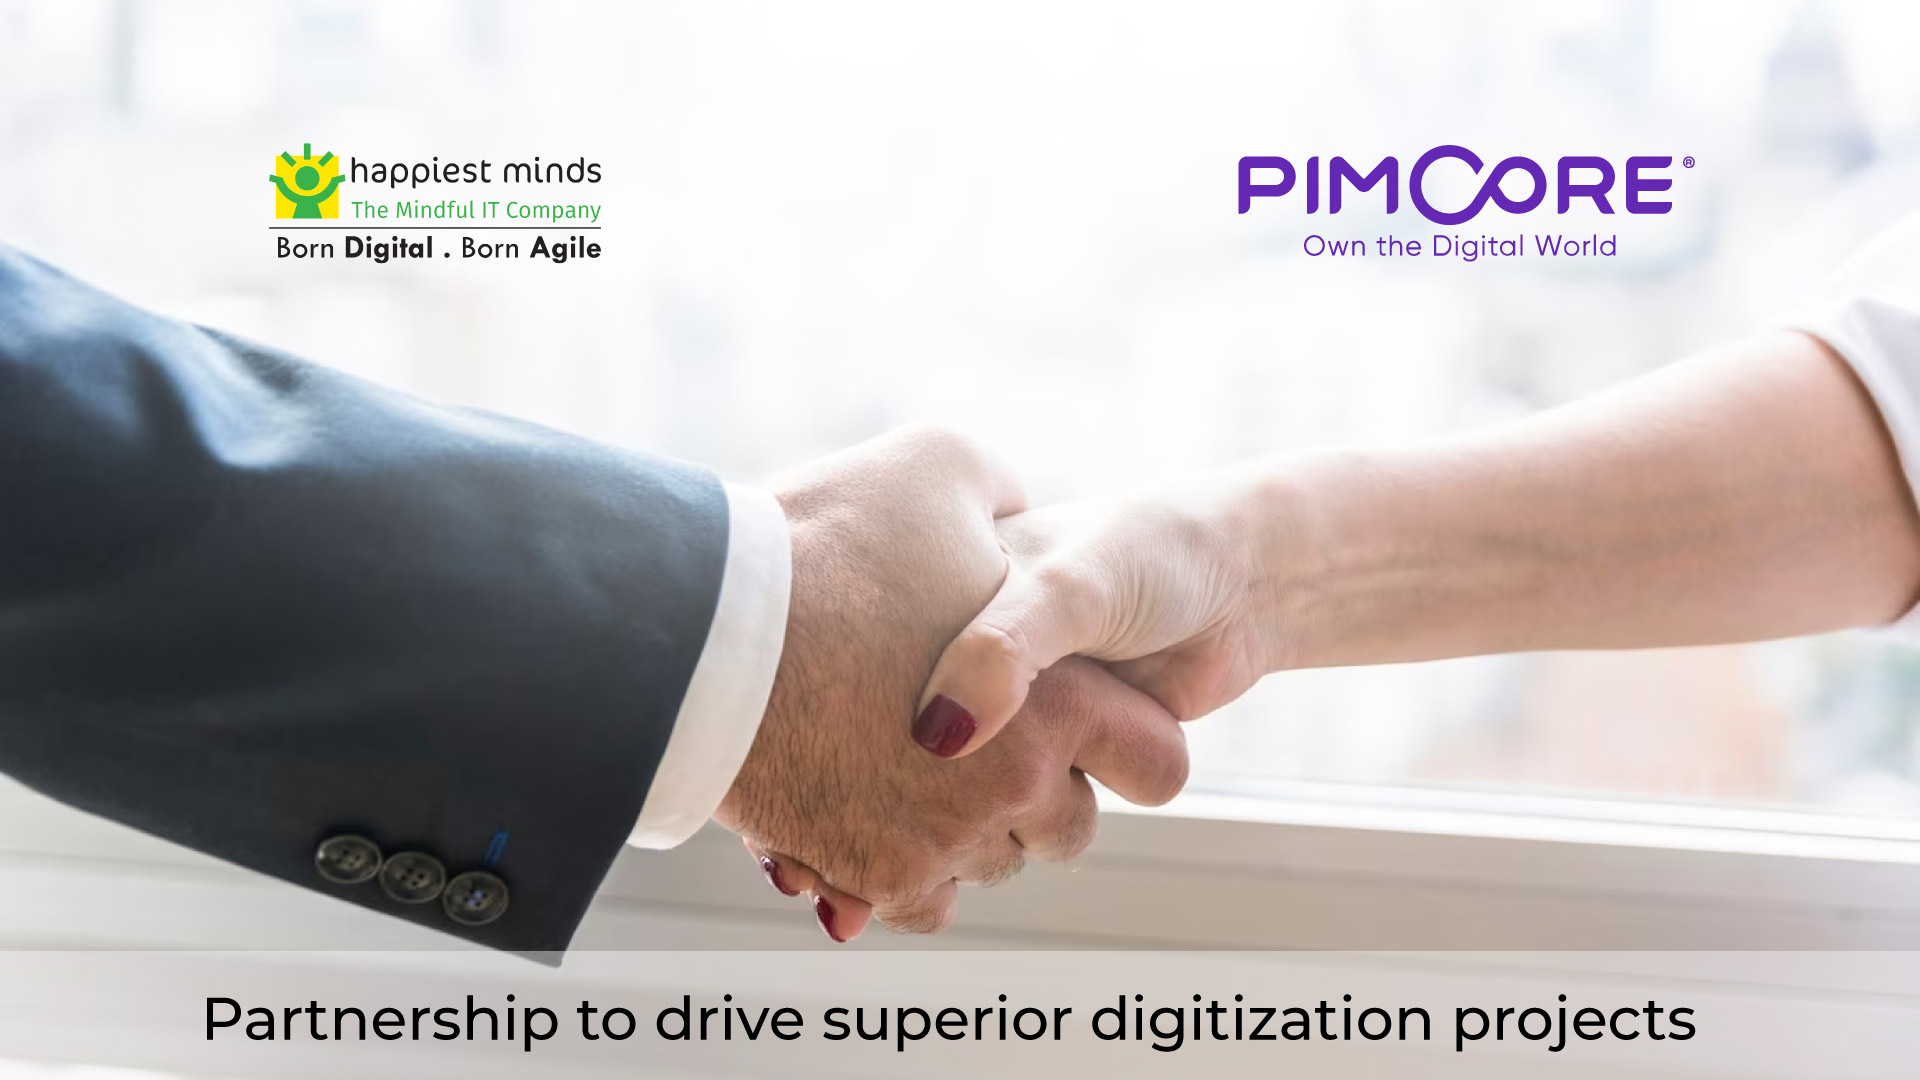 Happiest Minds Technologies partners with Pimcore to drive superior digitization projects